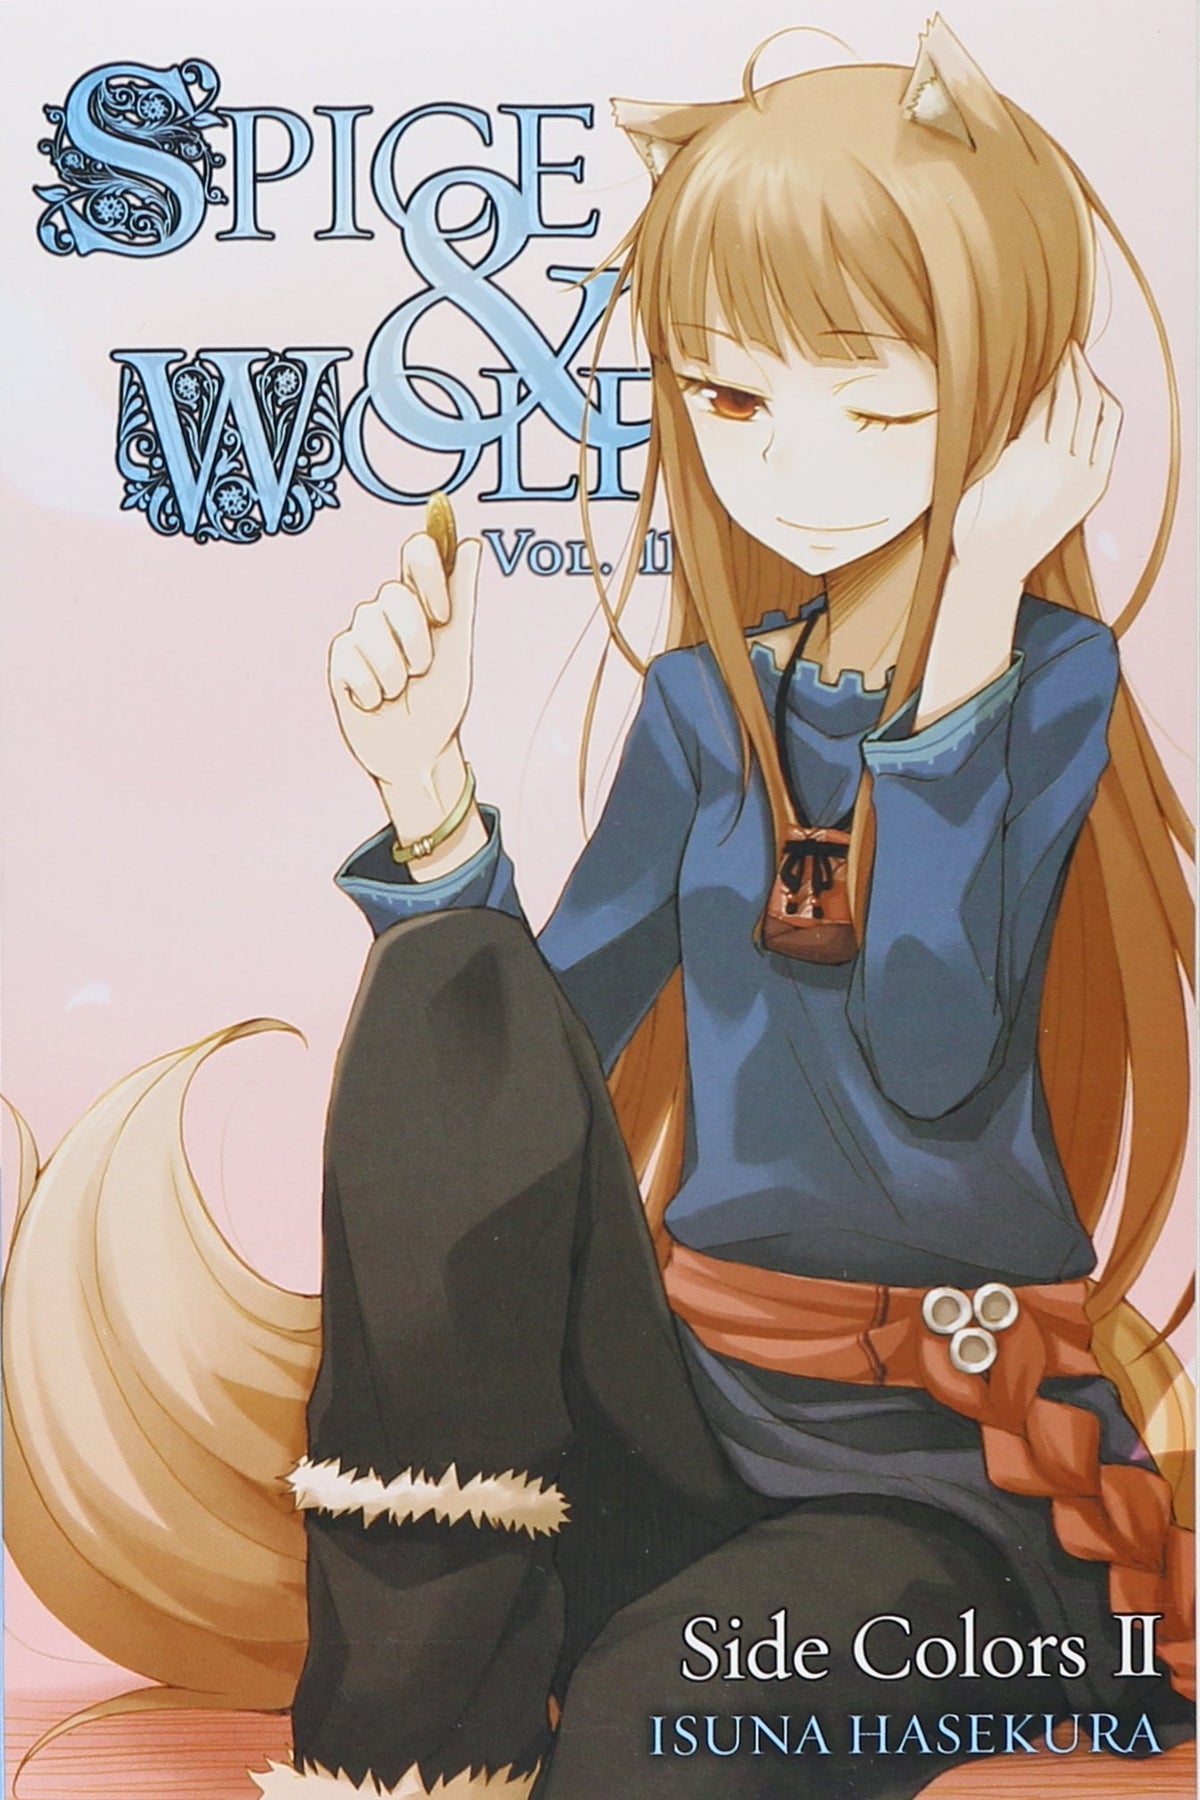 Spice and Wolf, Vol. 11: Side Colors II - light novel